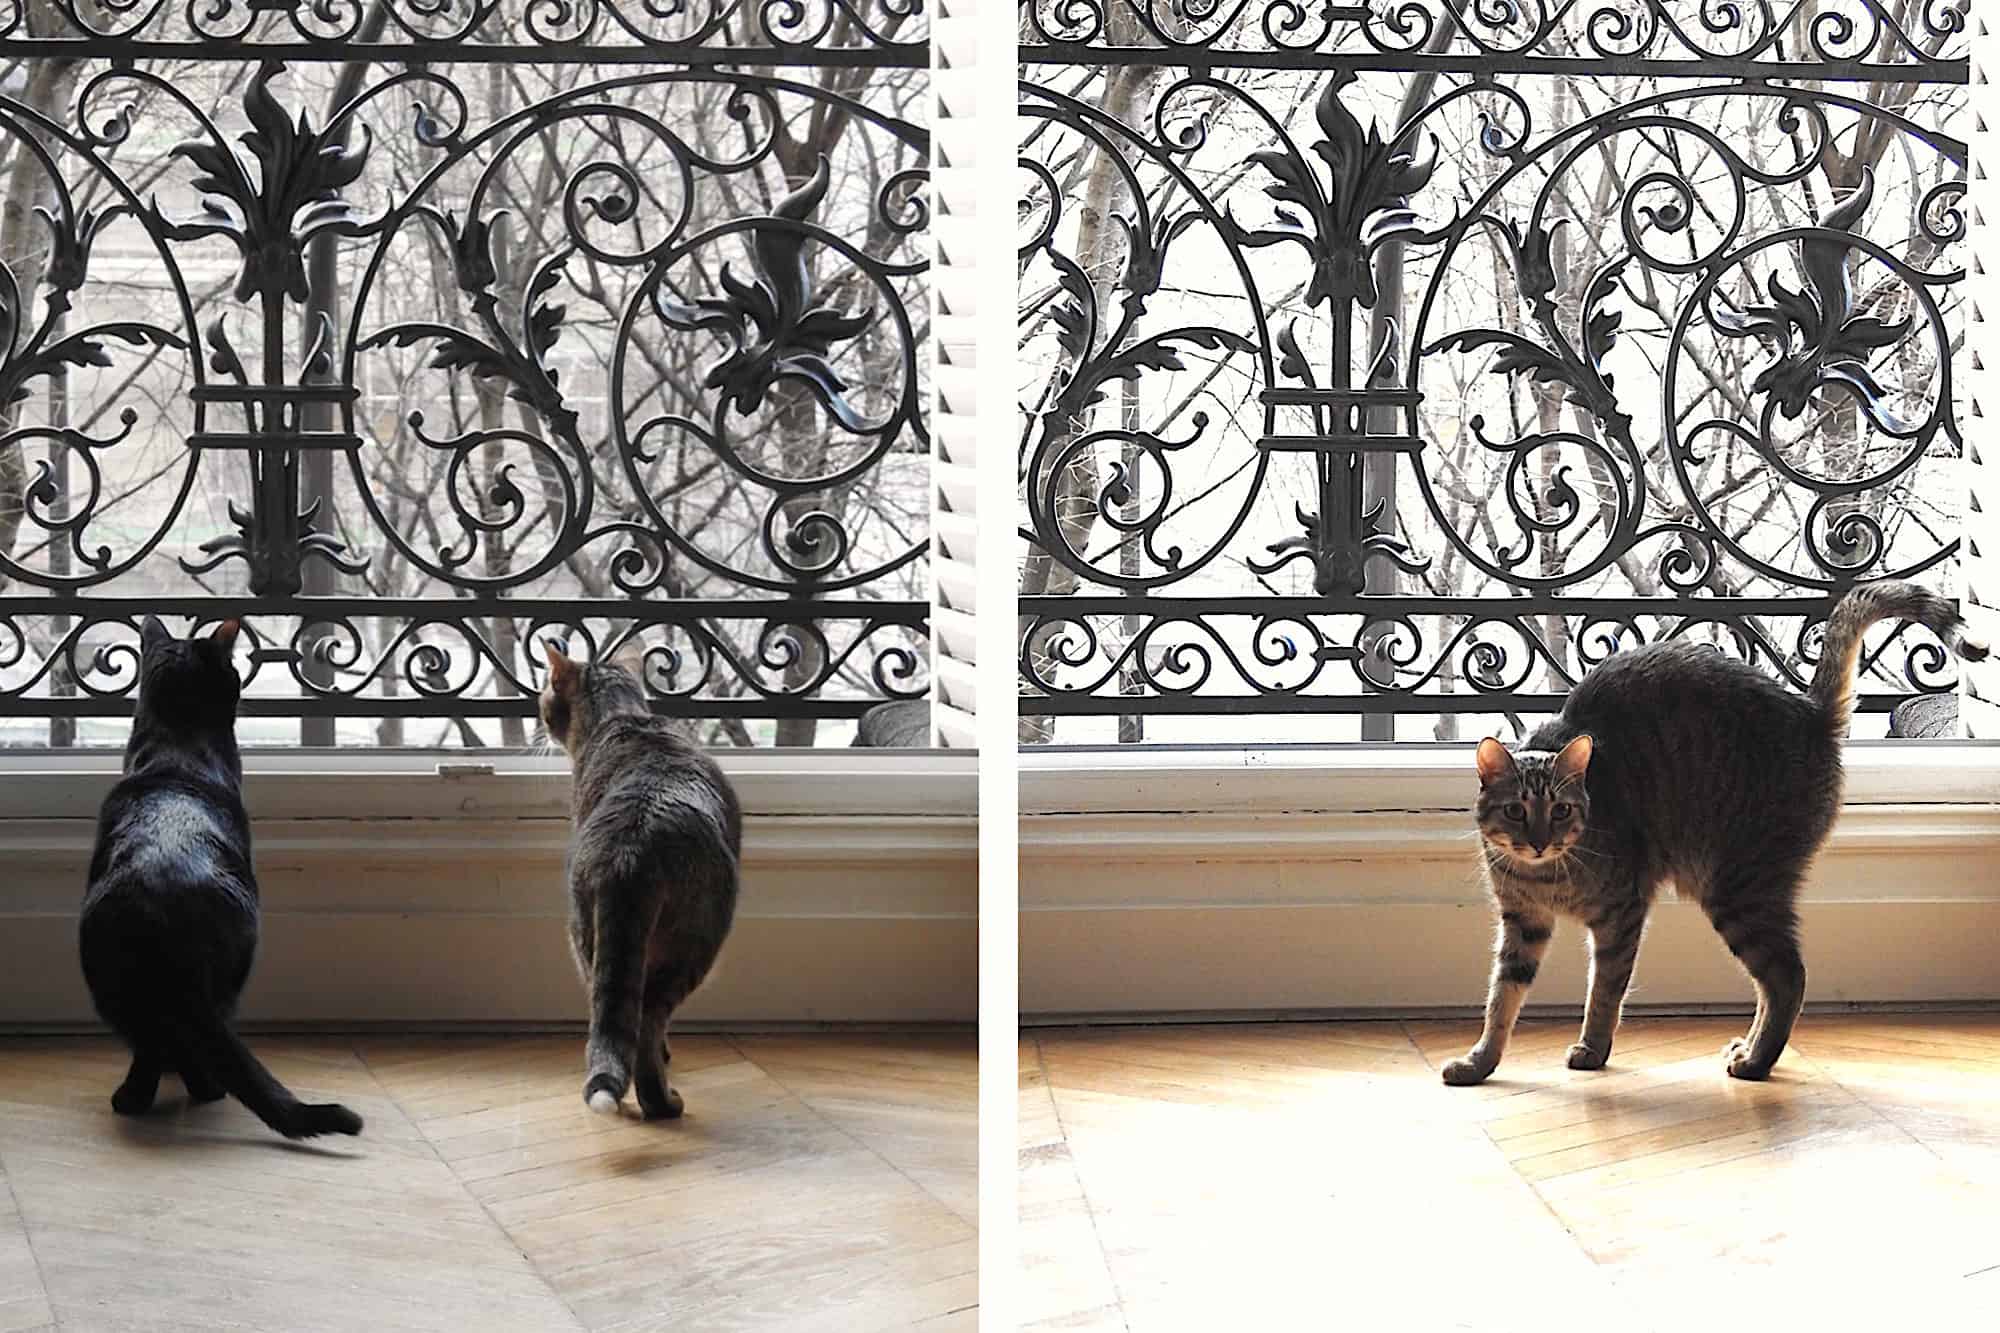 Two sleek kittens standing and looking out of an open window through the ornate iron railings in a Paris apartment (left). One of the cats standing its back up, facing the camera, in front of an open window and ornate railings in a Paris apartment (left).